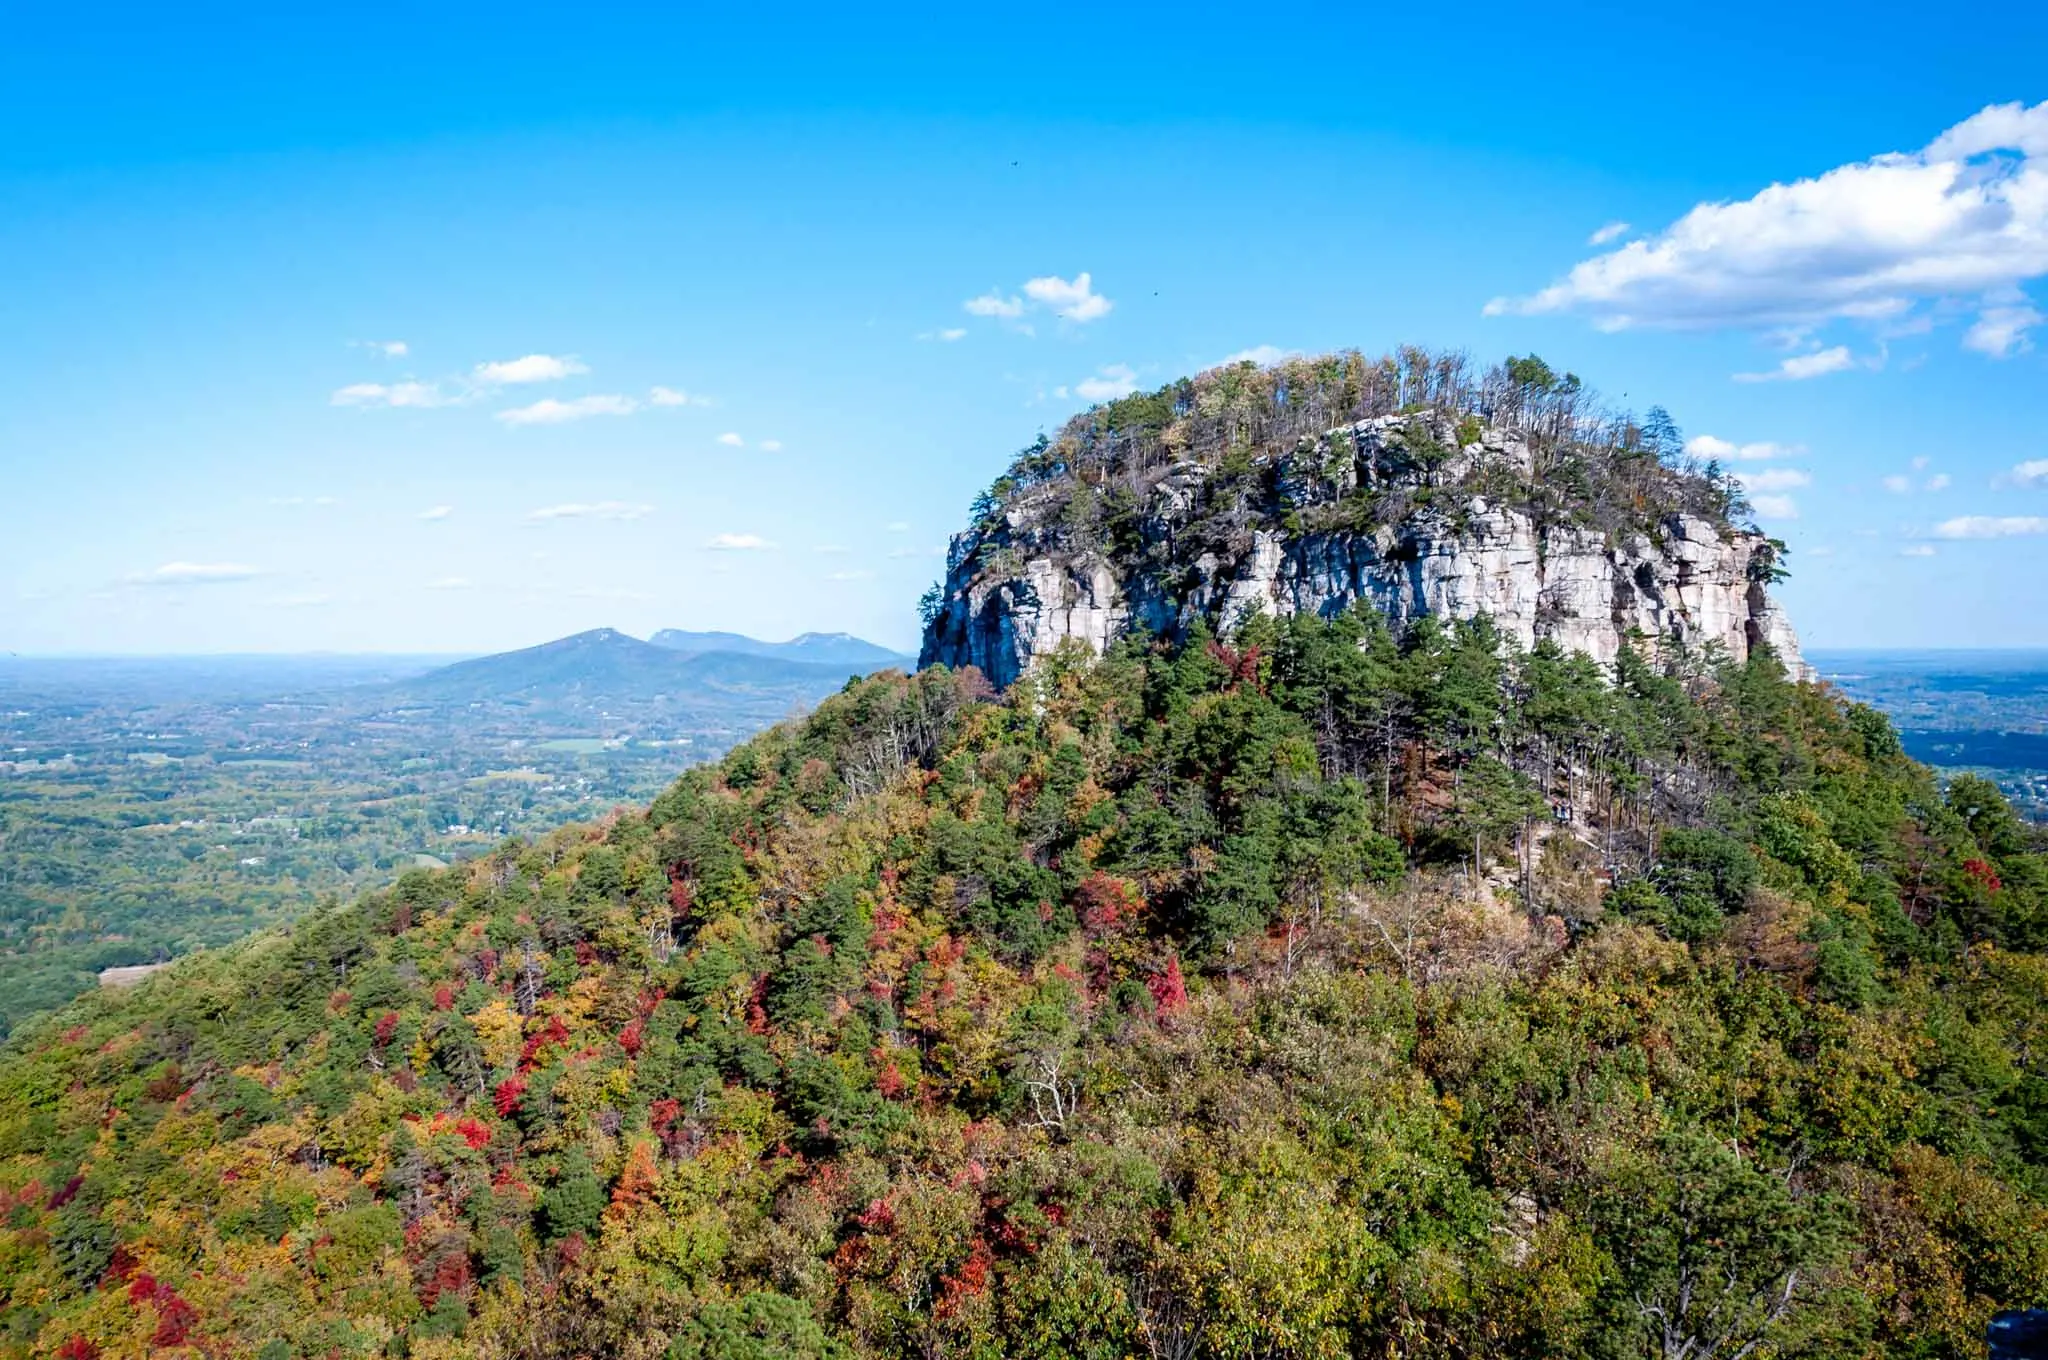 Top of a mountain with white rock peaking through and covered with trees with multicolored leaves.